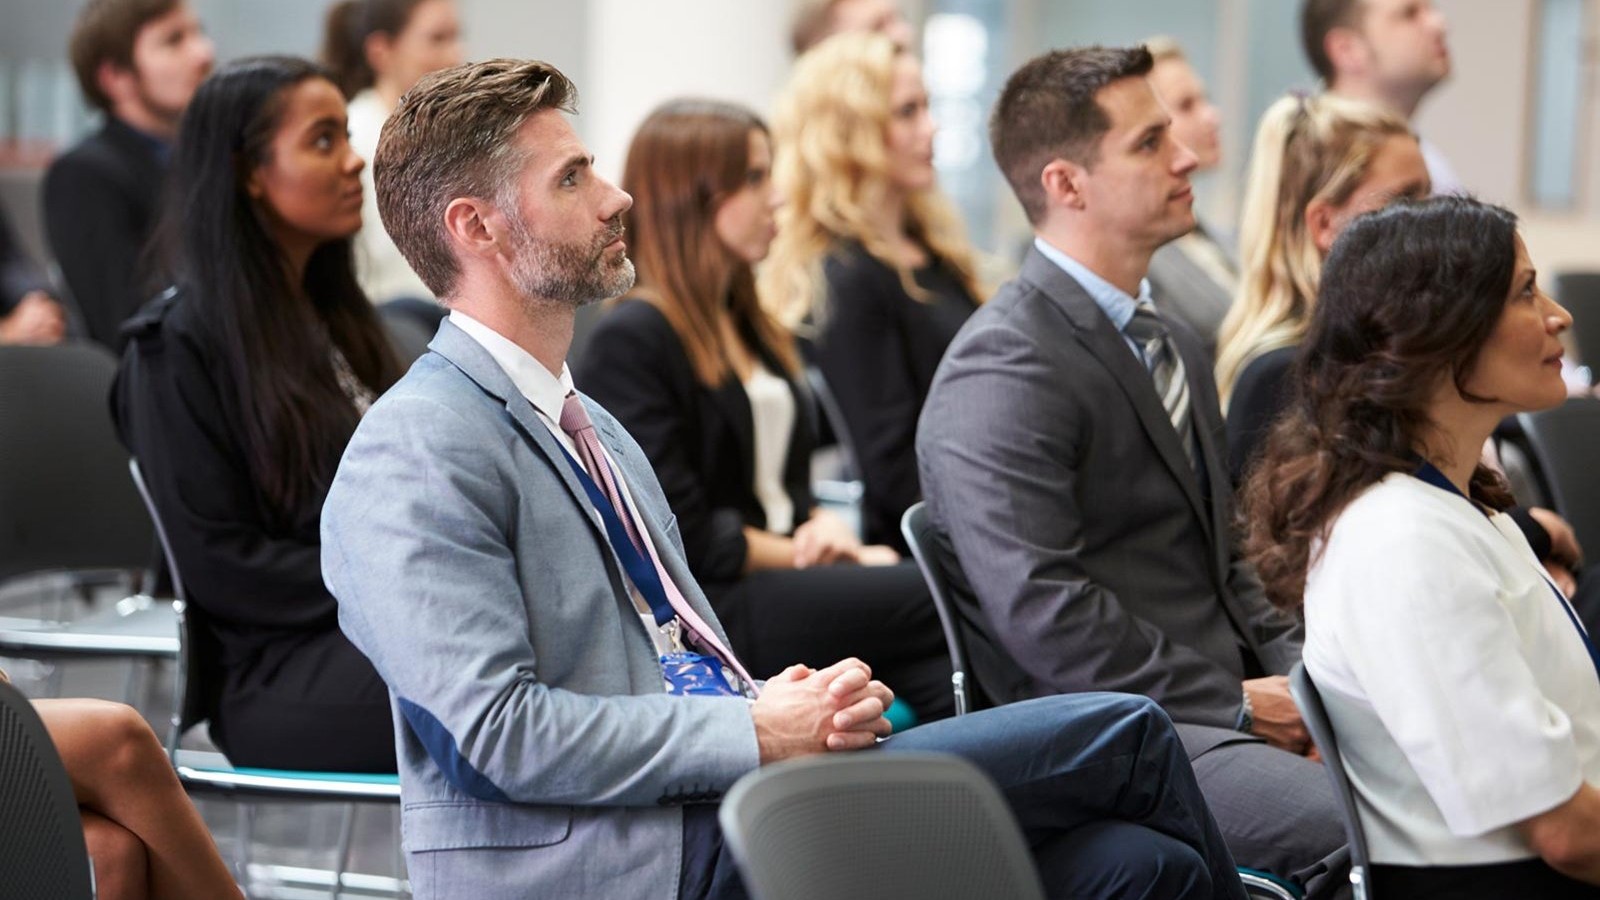 Seated attendees at a business conference.